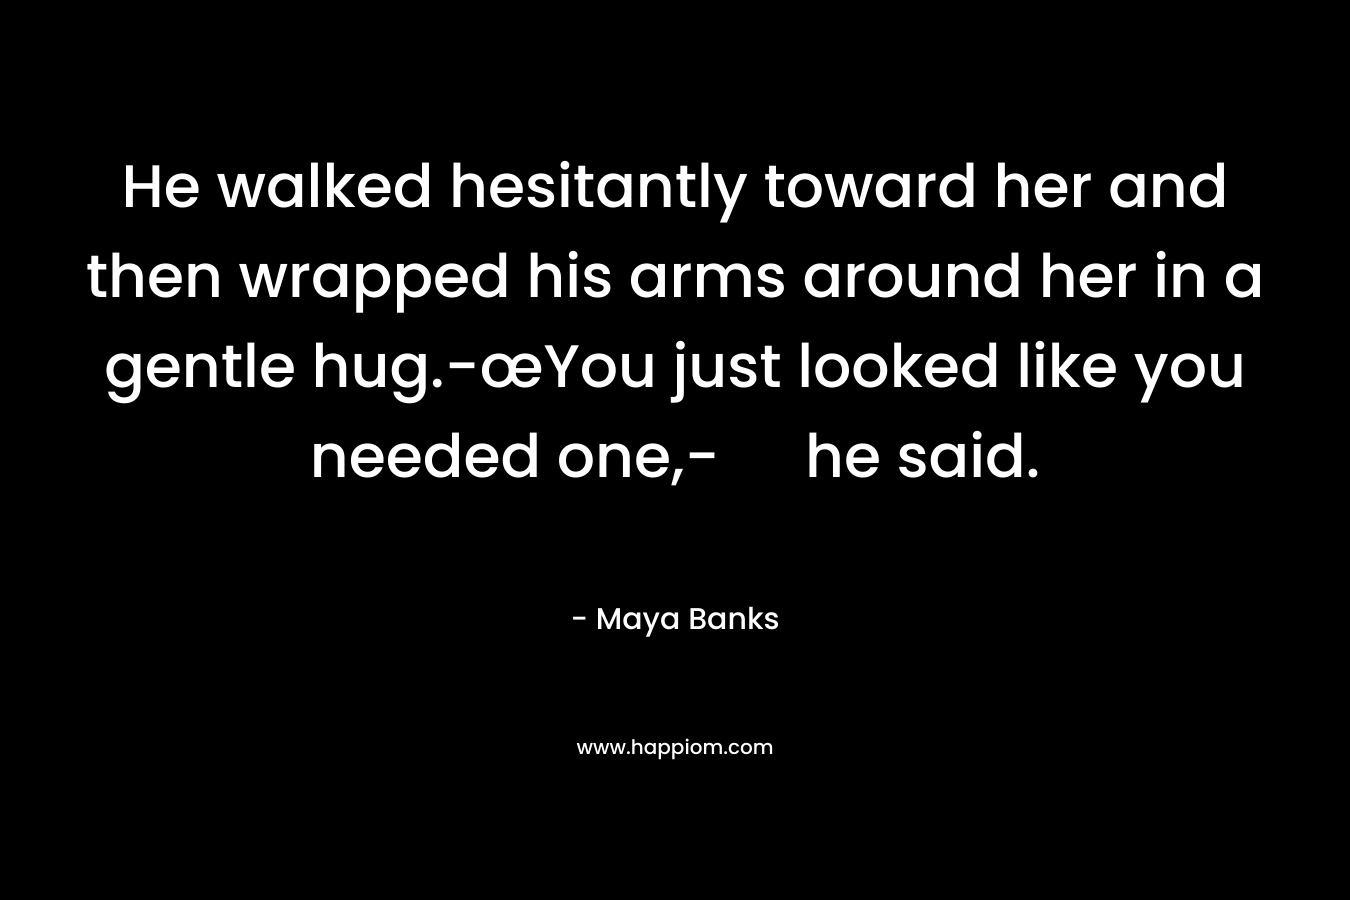 He walked hesitantly toward her and then wrapped his arms around her in a gentle hug.-œYou just looked like you needed one,- he said. – Maya Banks